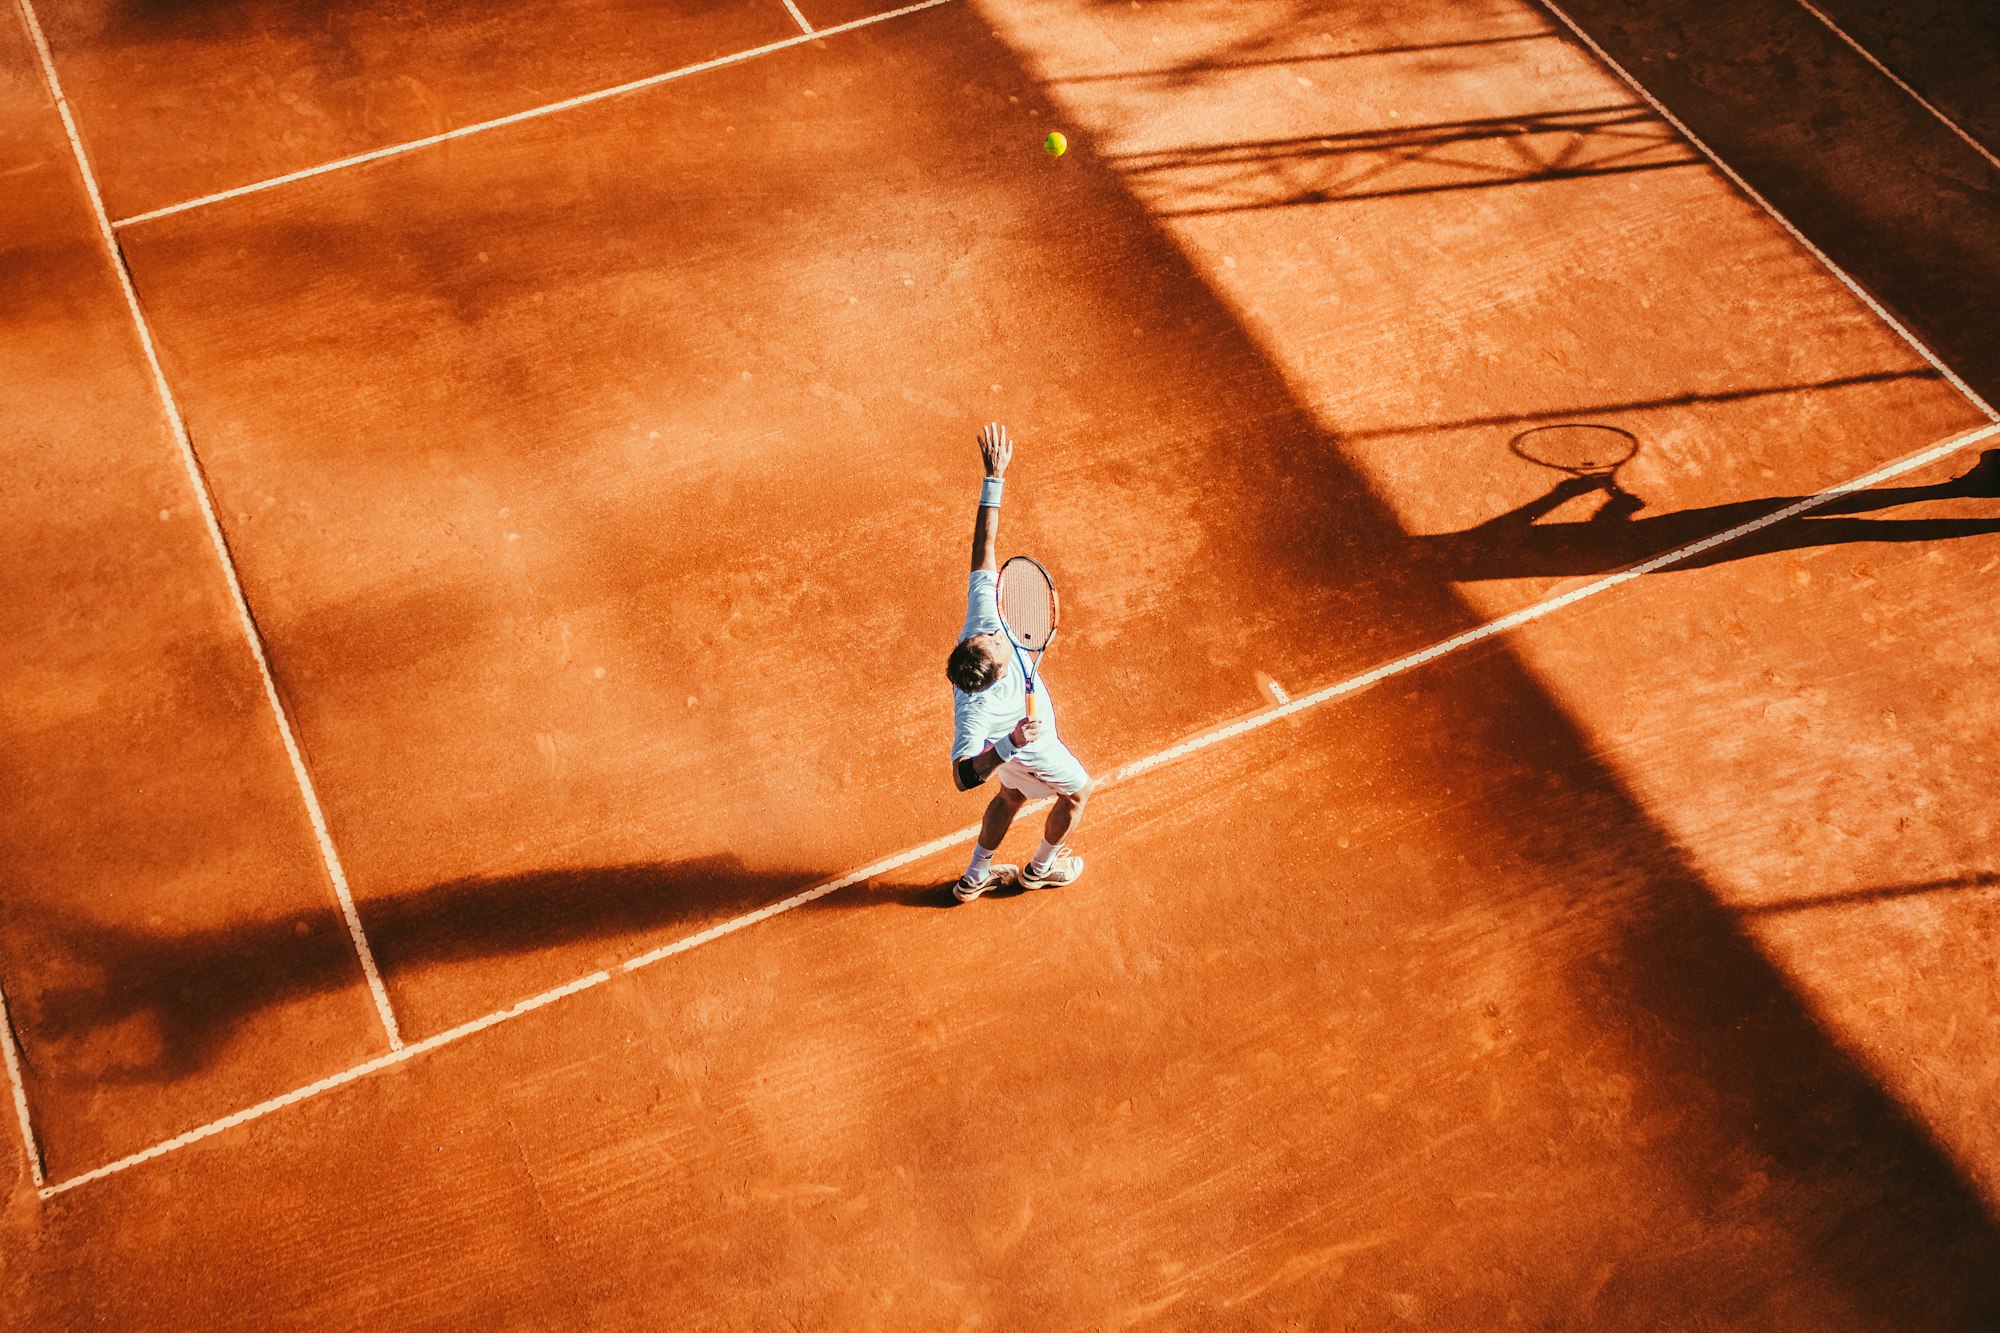 What Are The Four Types Of Serves In Tennis